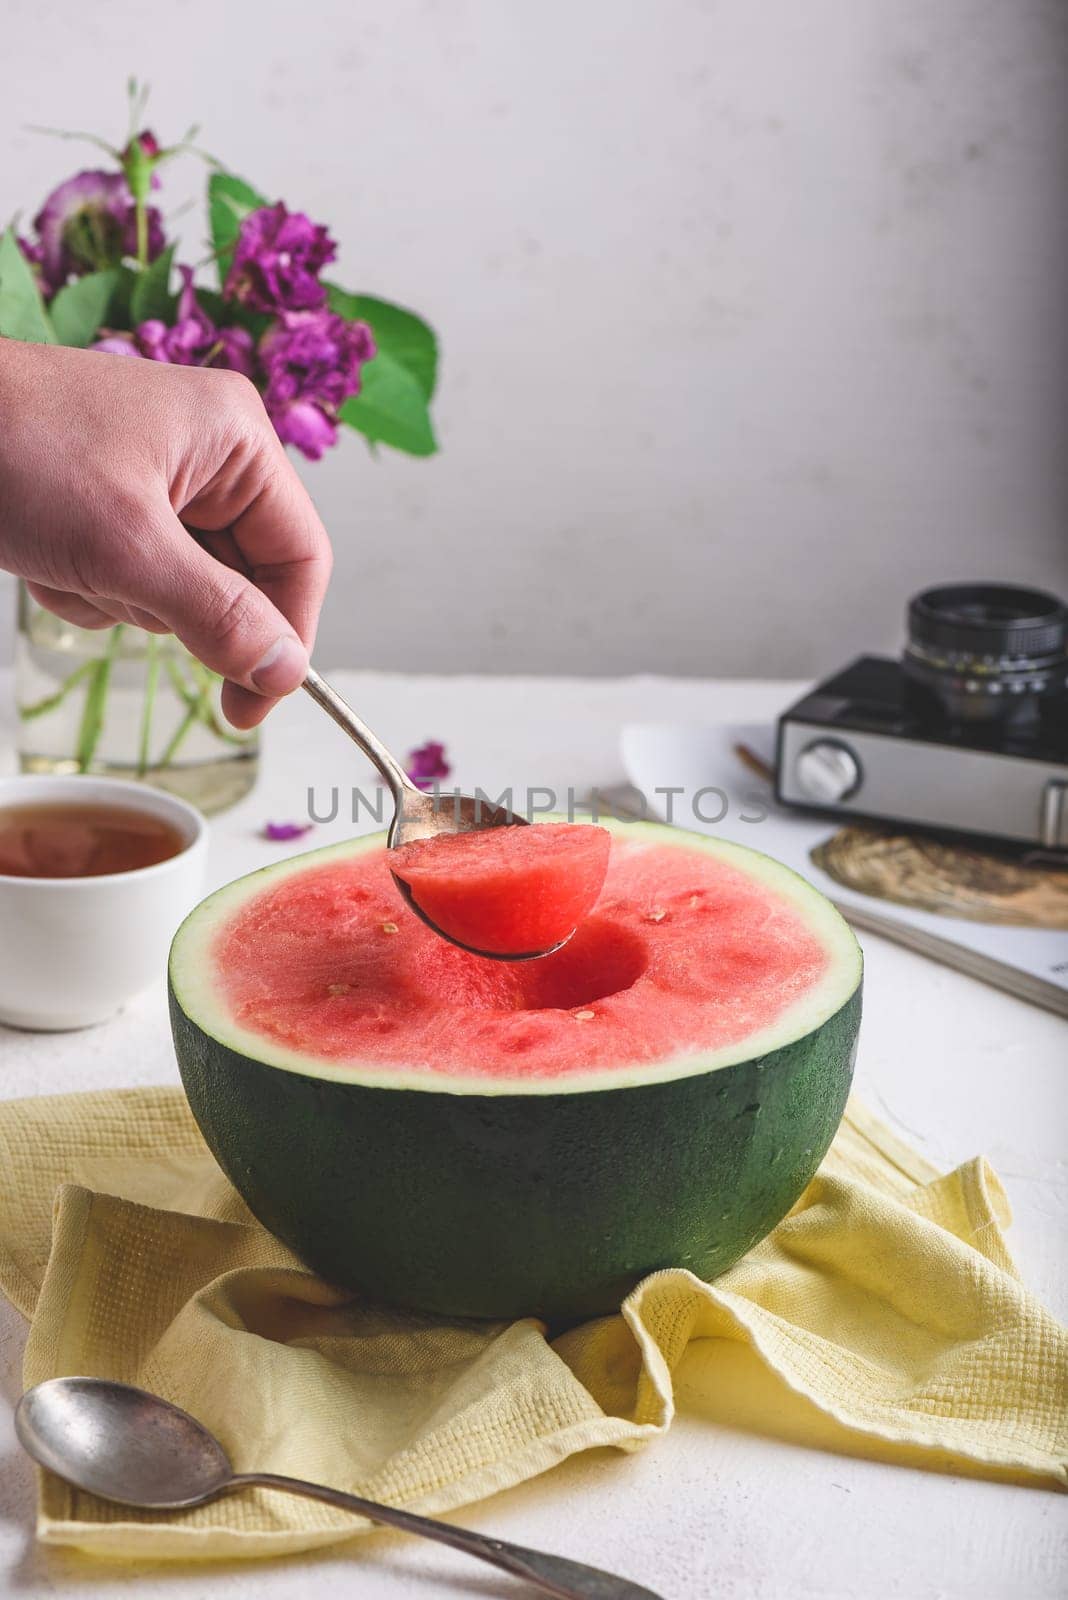 The Spoon with Piece of Watermelon in Man Hand by Seva_blsv